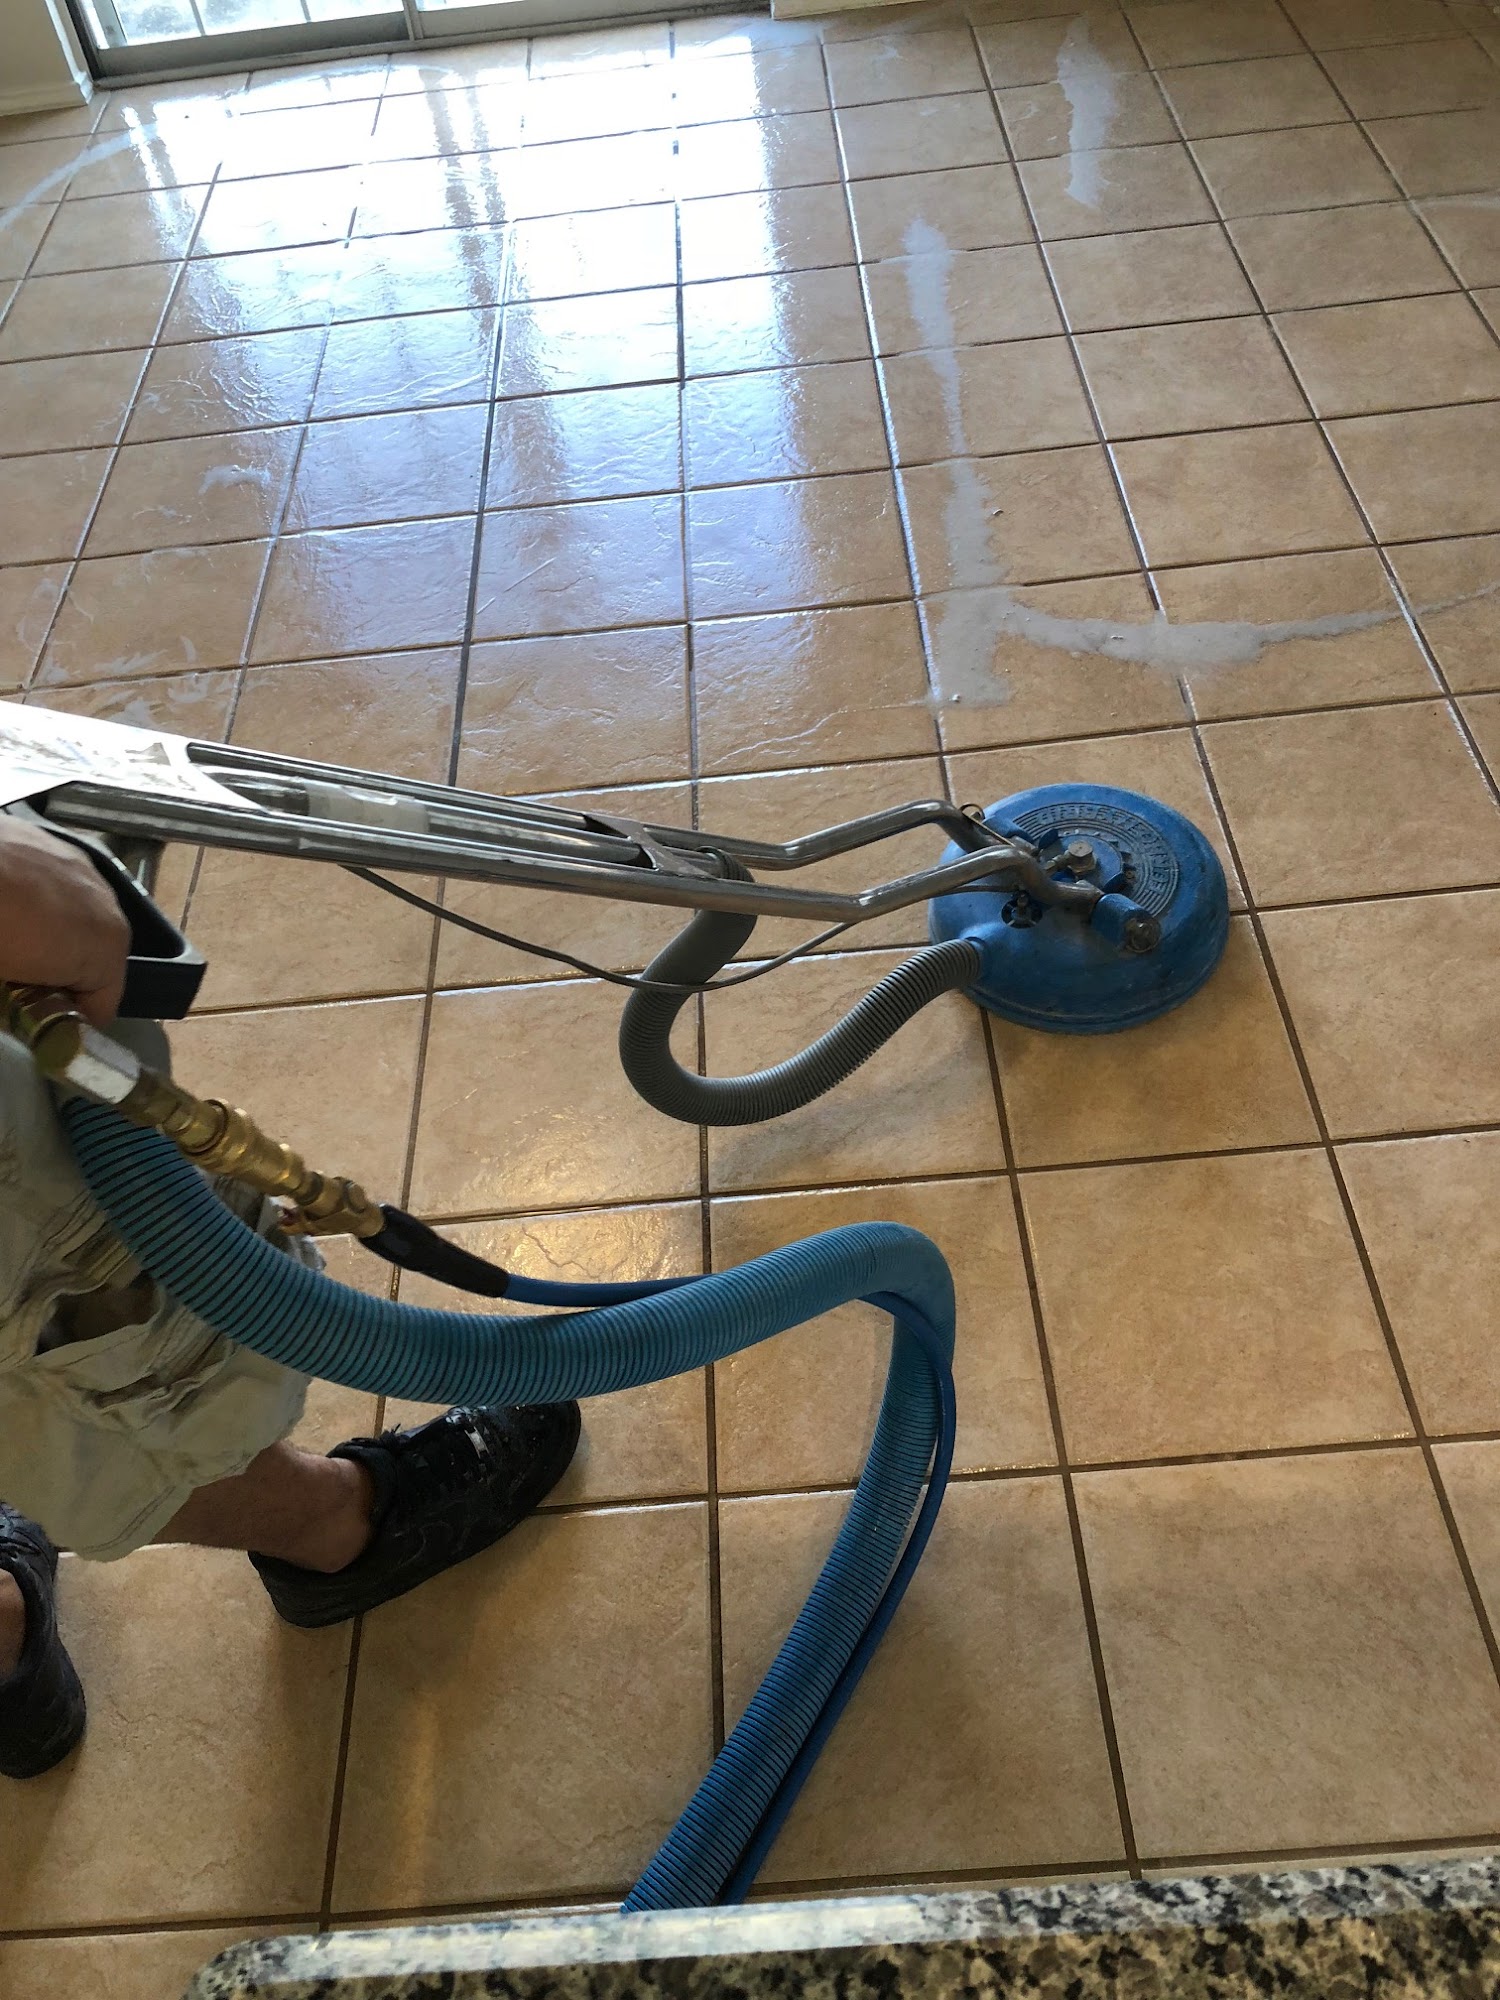 Worry Free Carpet Cleaning